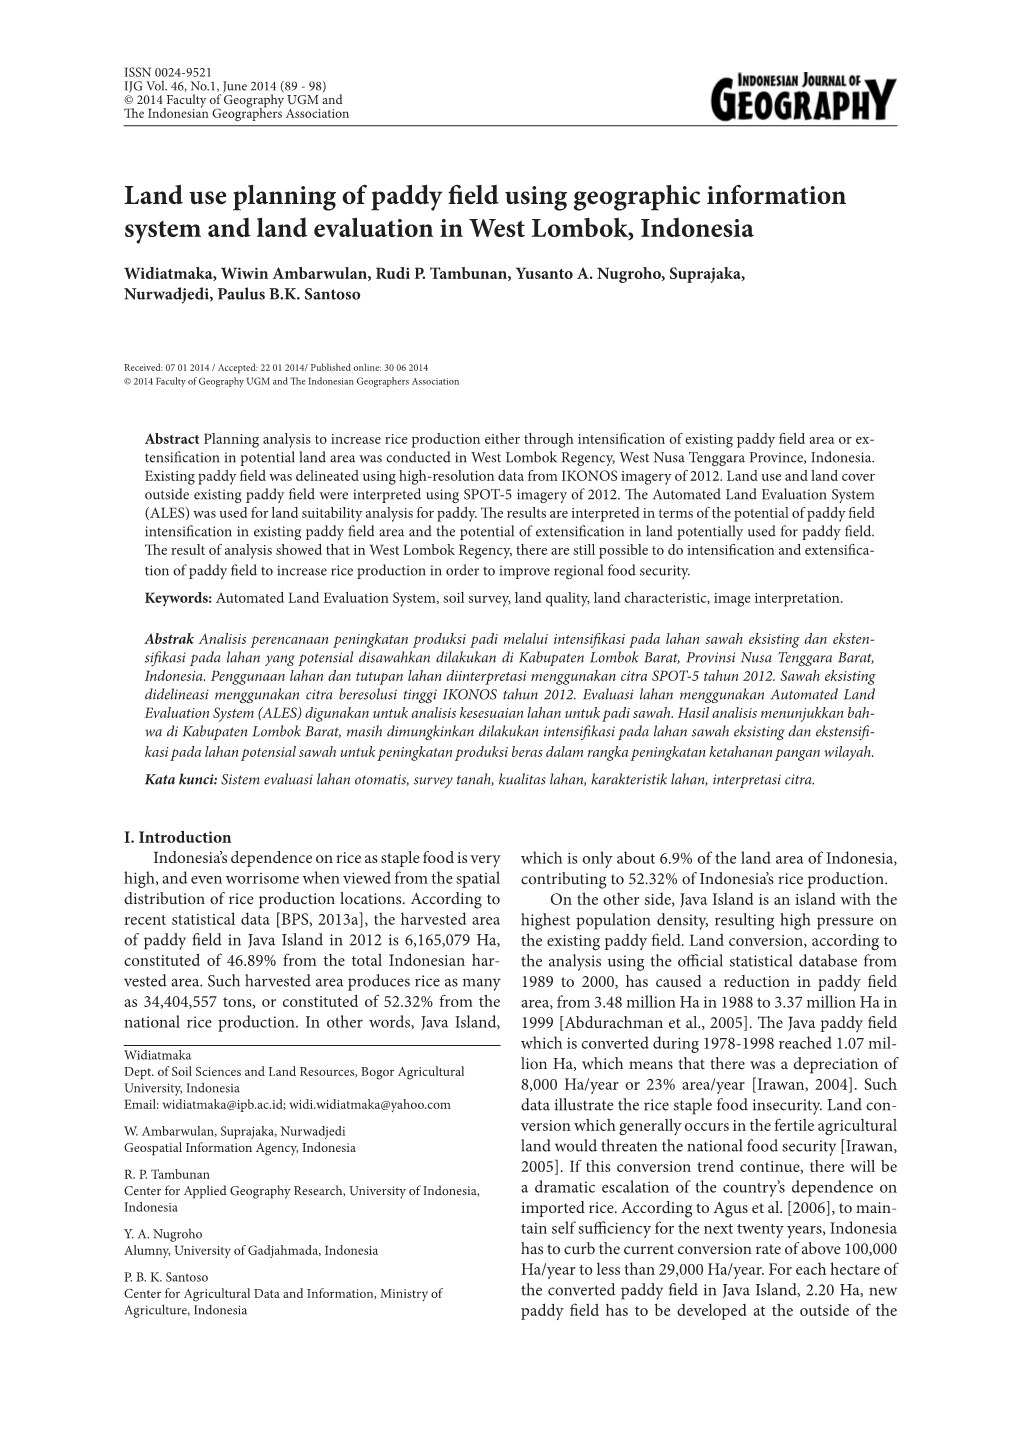 Land Use Planning of Paddy Field Using Geographic Information System and Land Evaluation in West Lombok, Indonesia